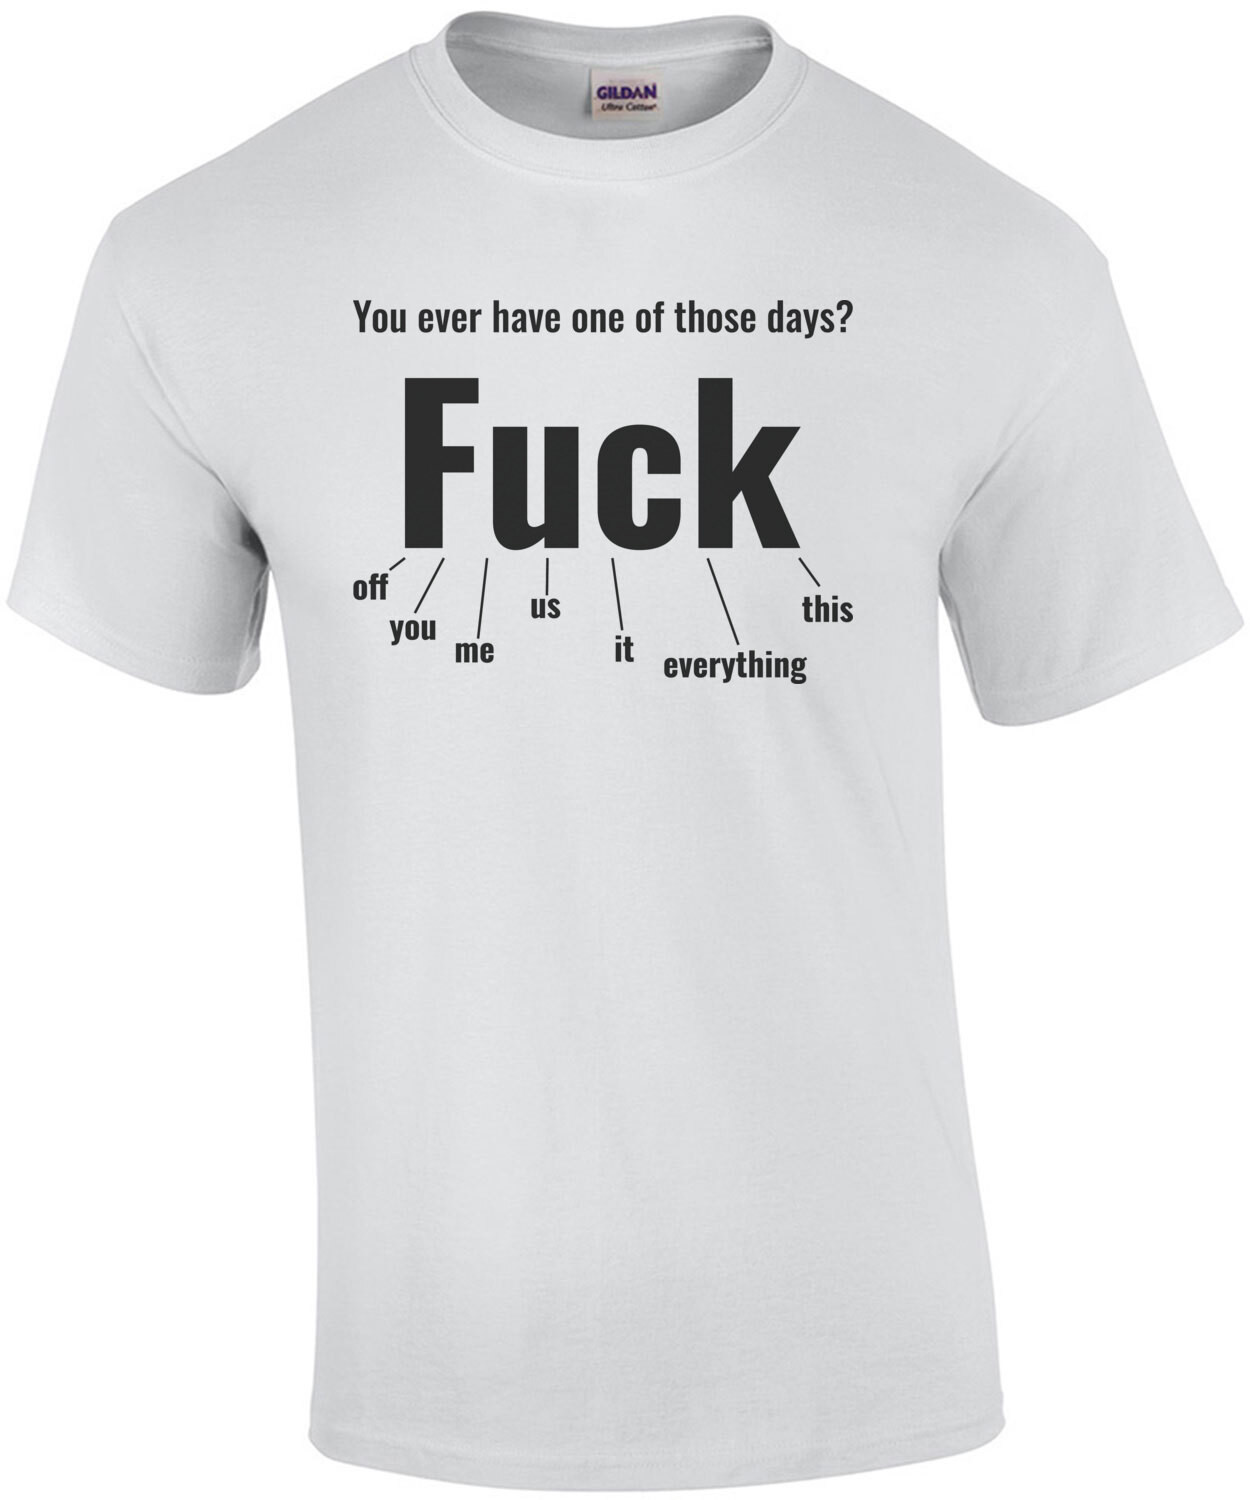 You ever have one of those days? Fuck everything t-shirt